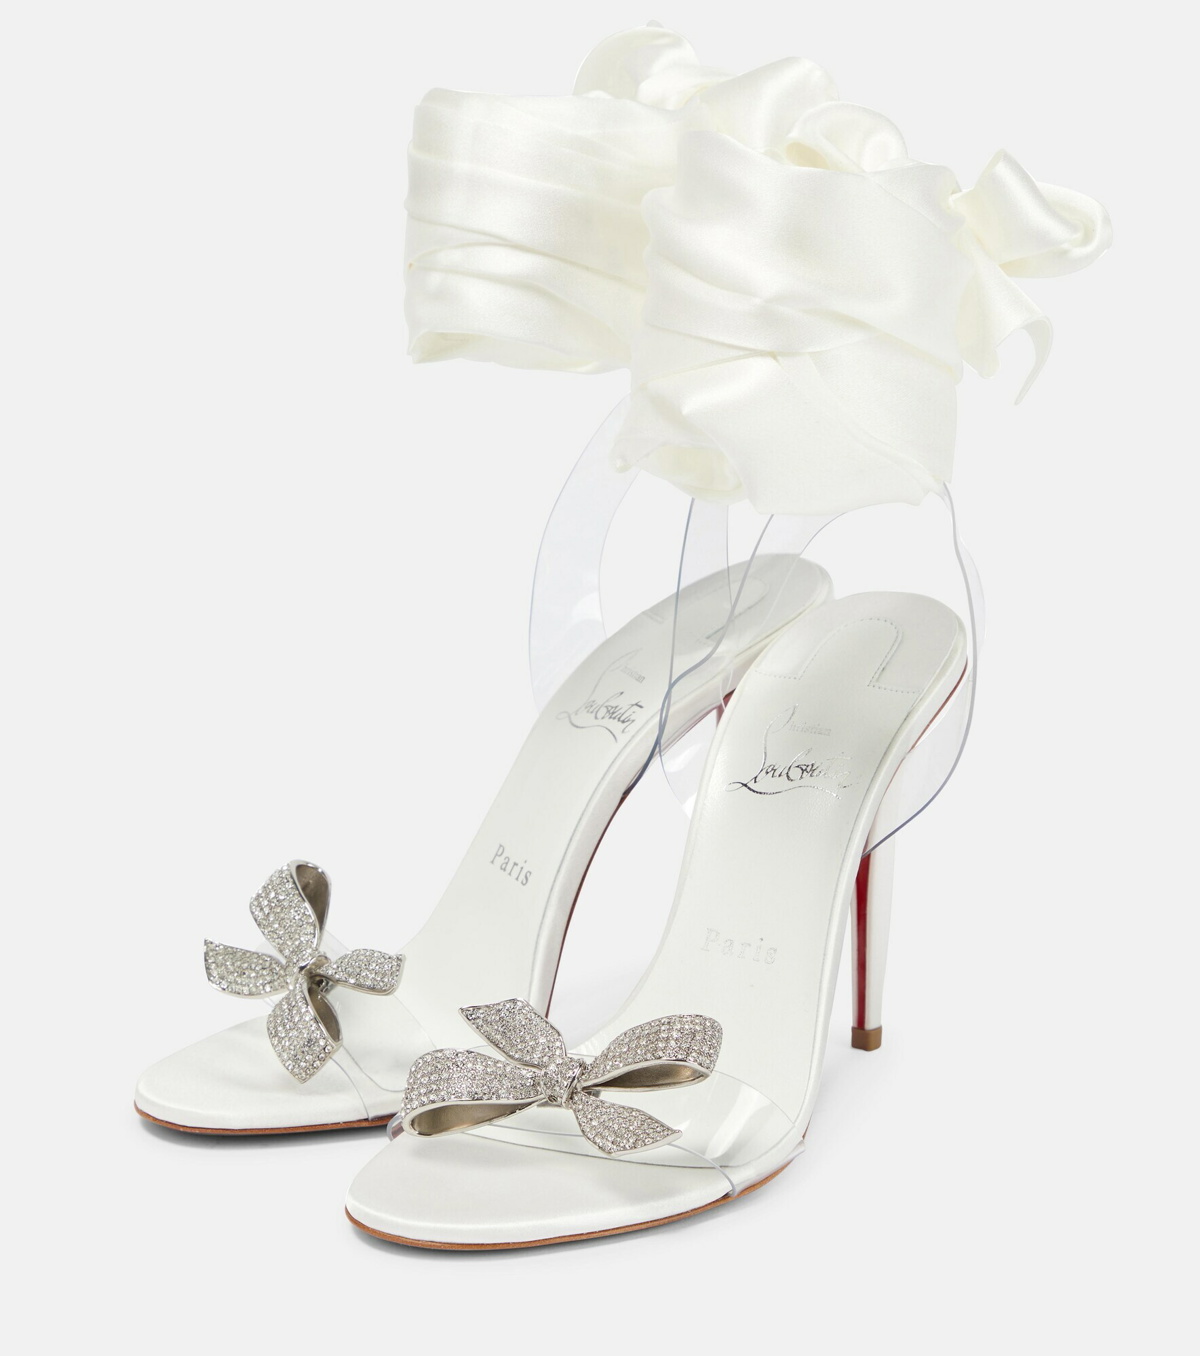 Christian Louboutin Crystal Bow Silk-tie Red Sole Sandals in White